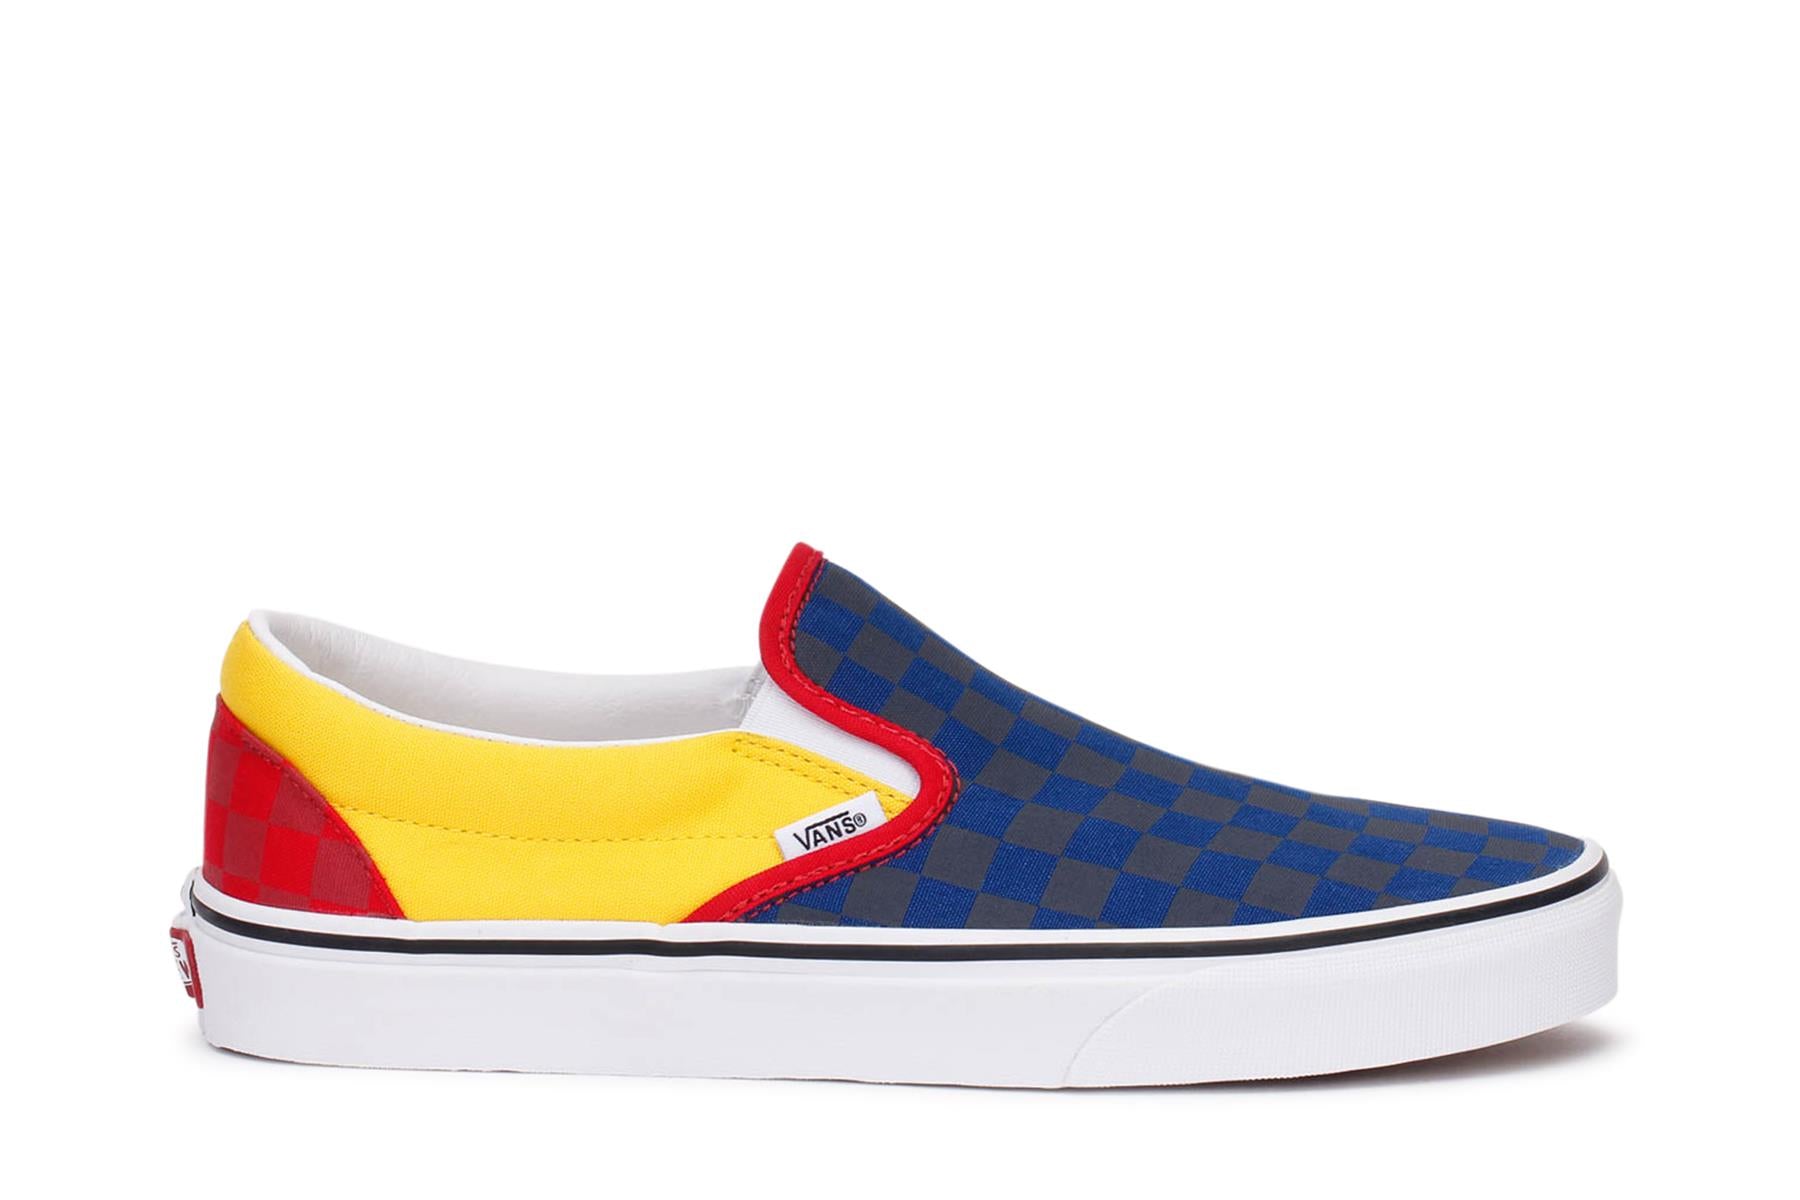 vans-mens-classic-slip-on-sneakers-rally-navy-yellow-red-vn0a4bv3v3d-main